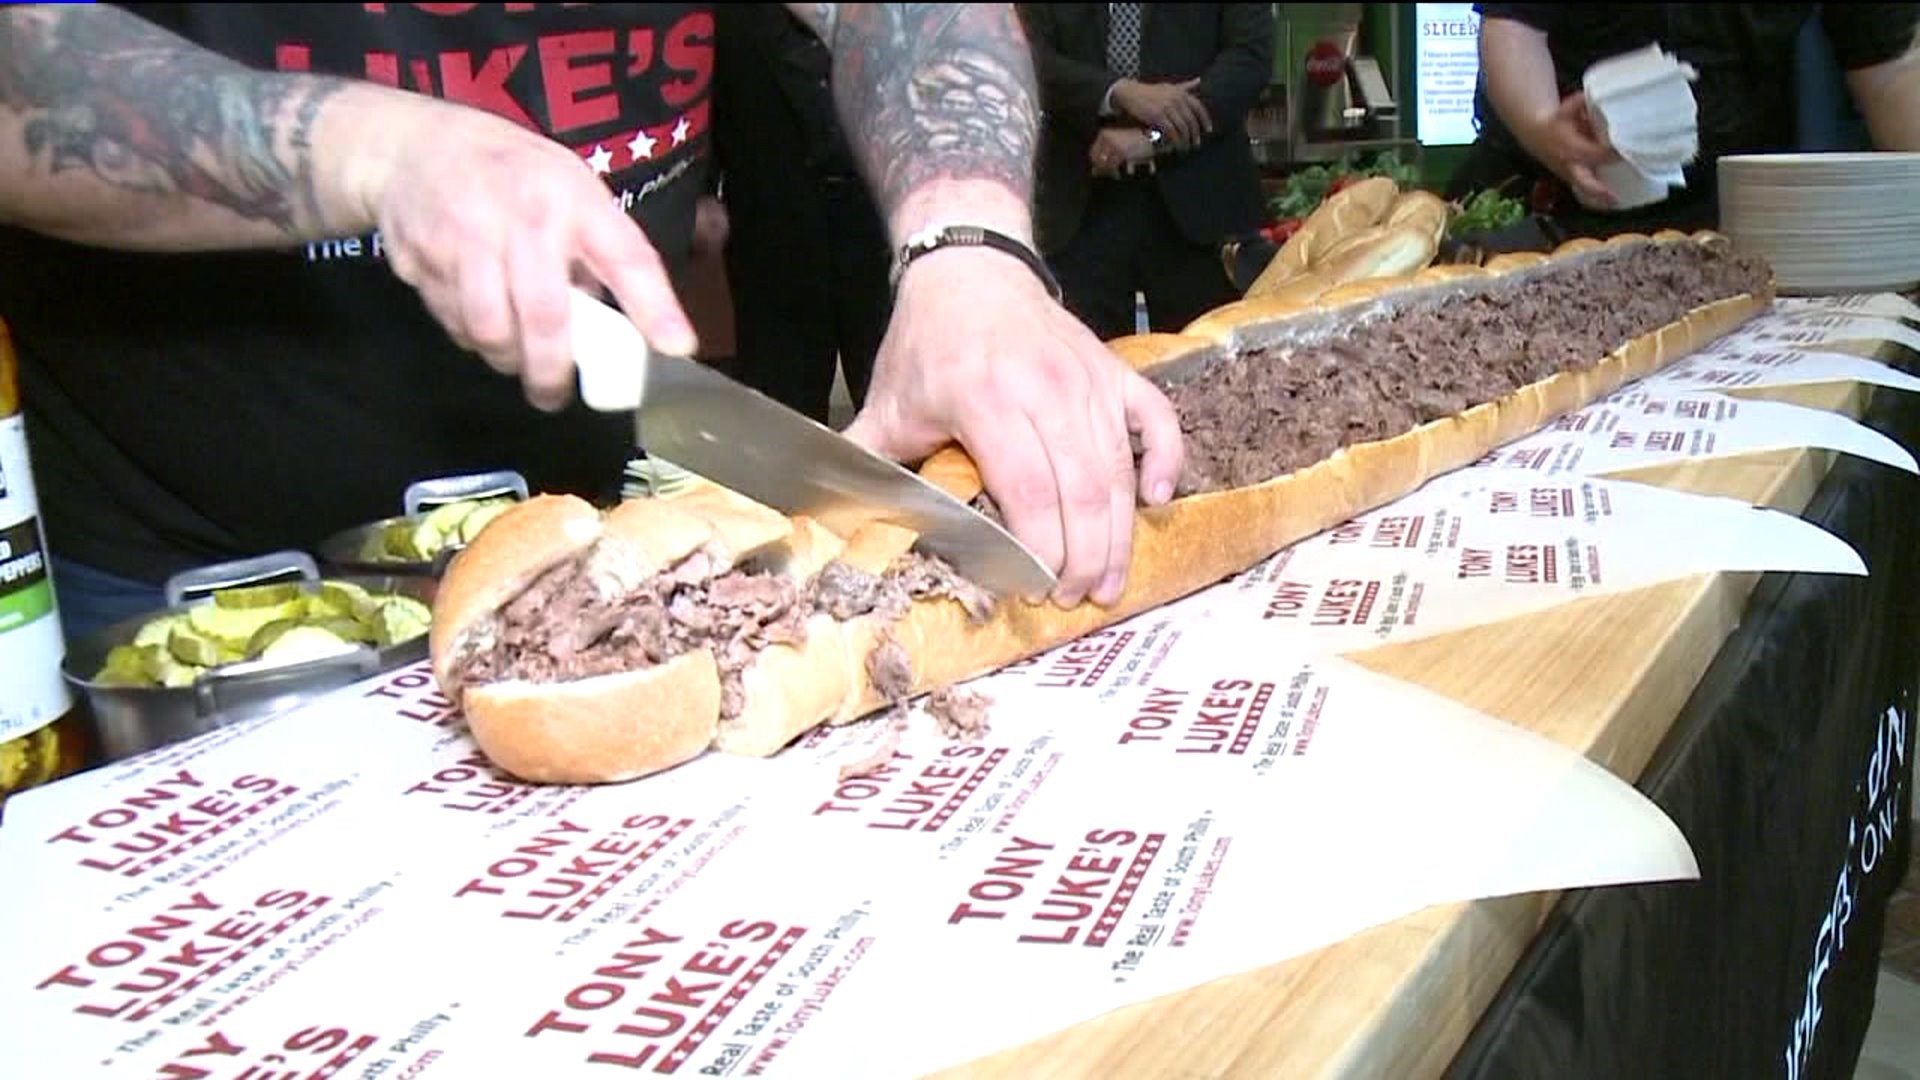 The popular cheesesteak franchise in Philadelphia is making its way into our area